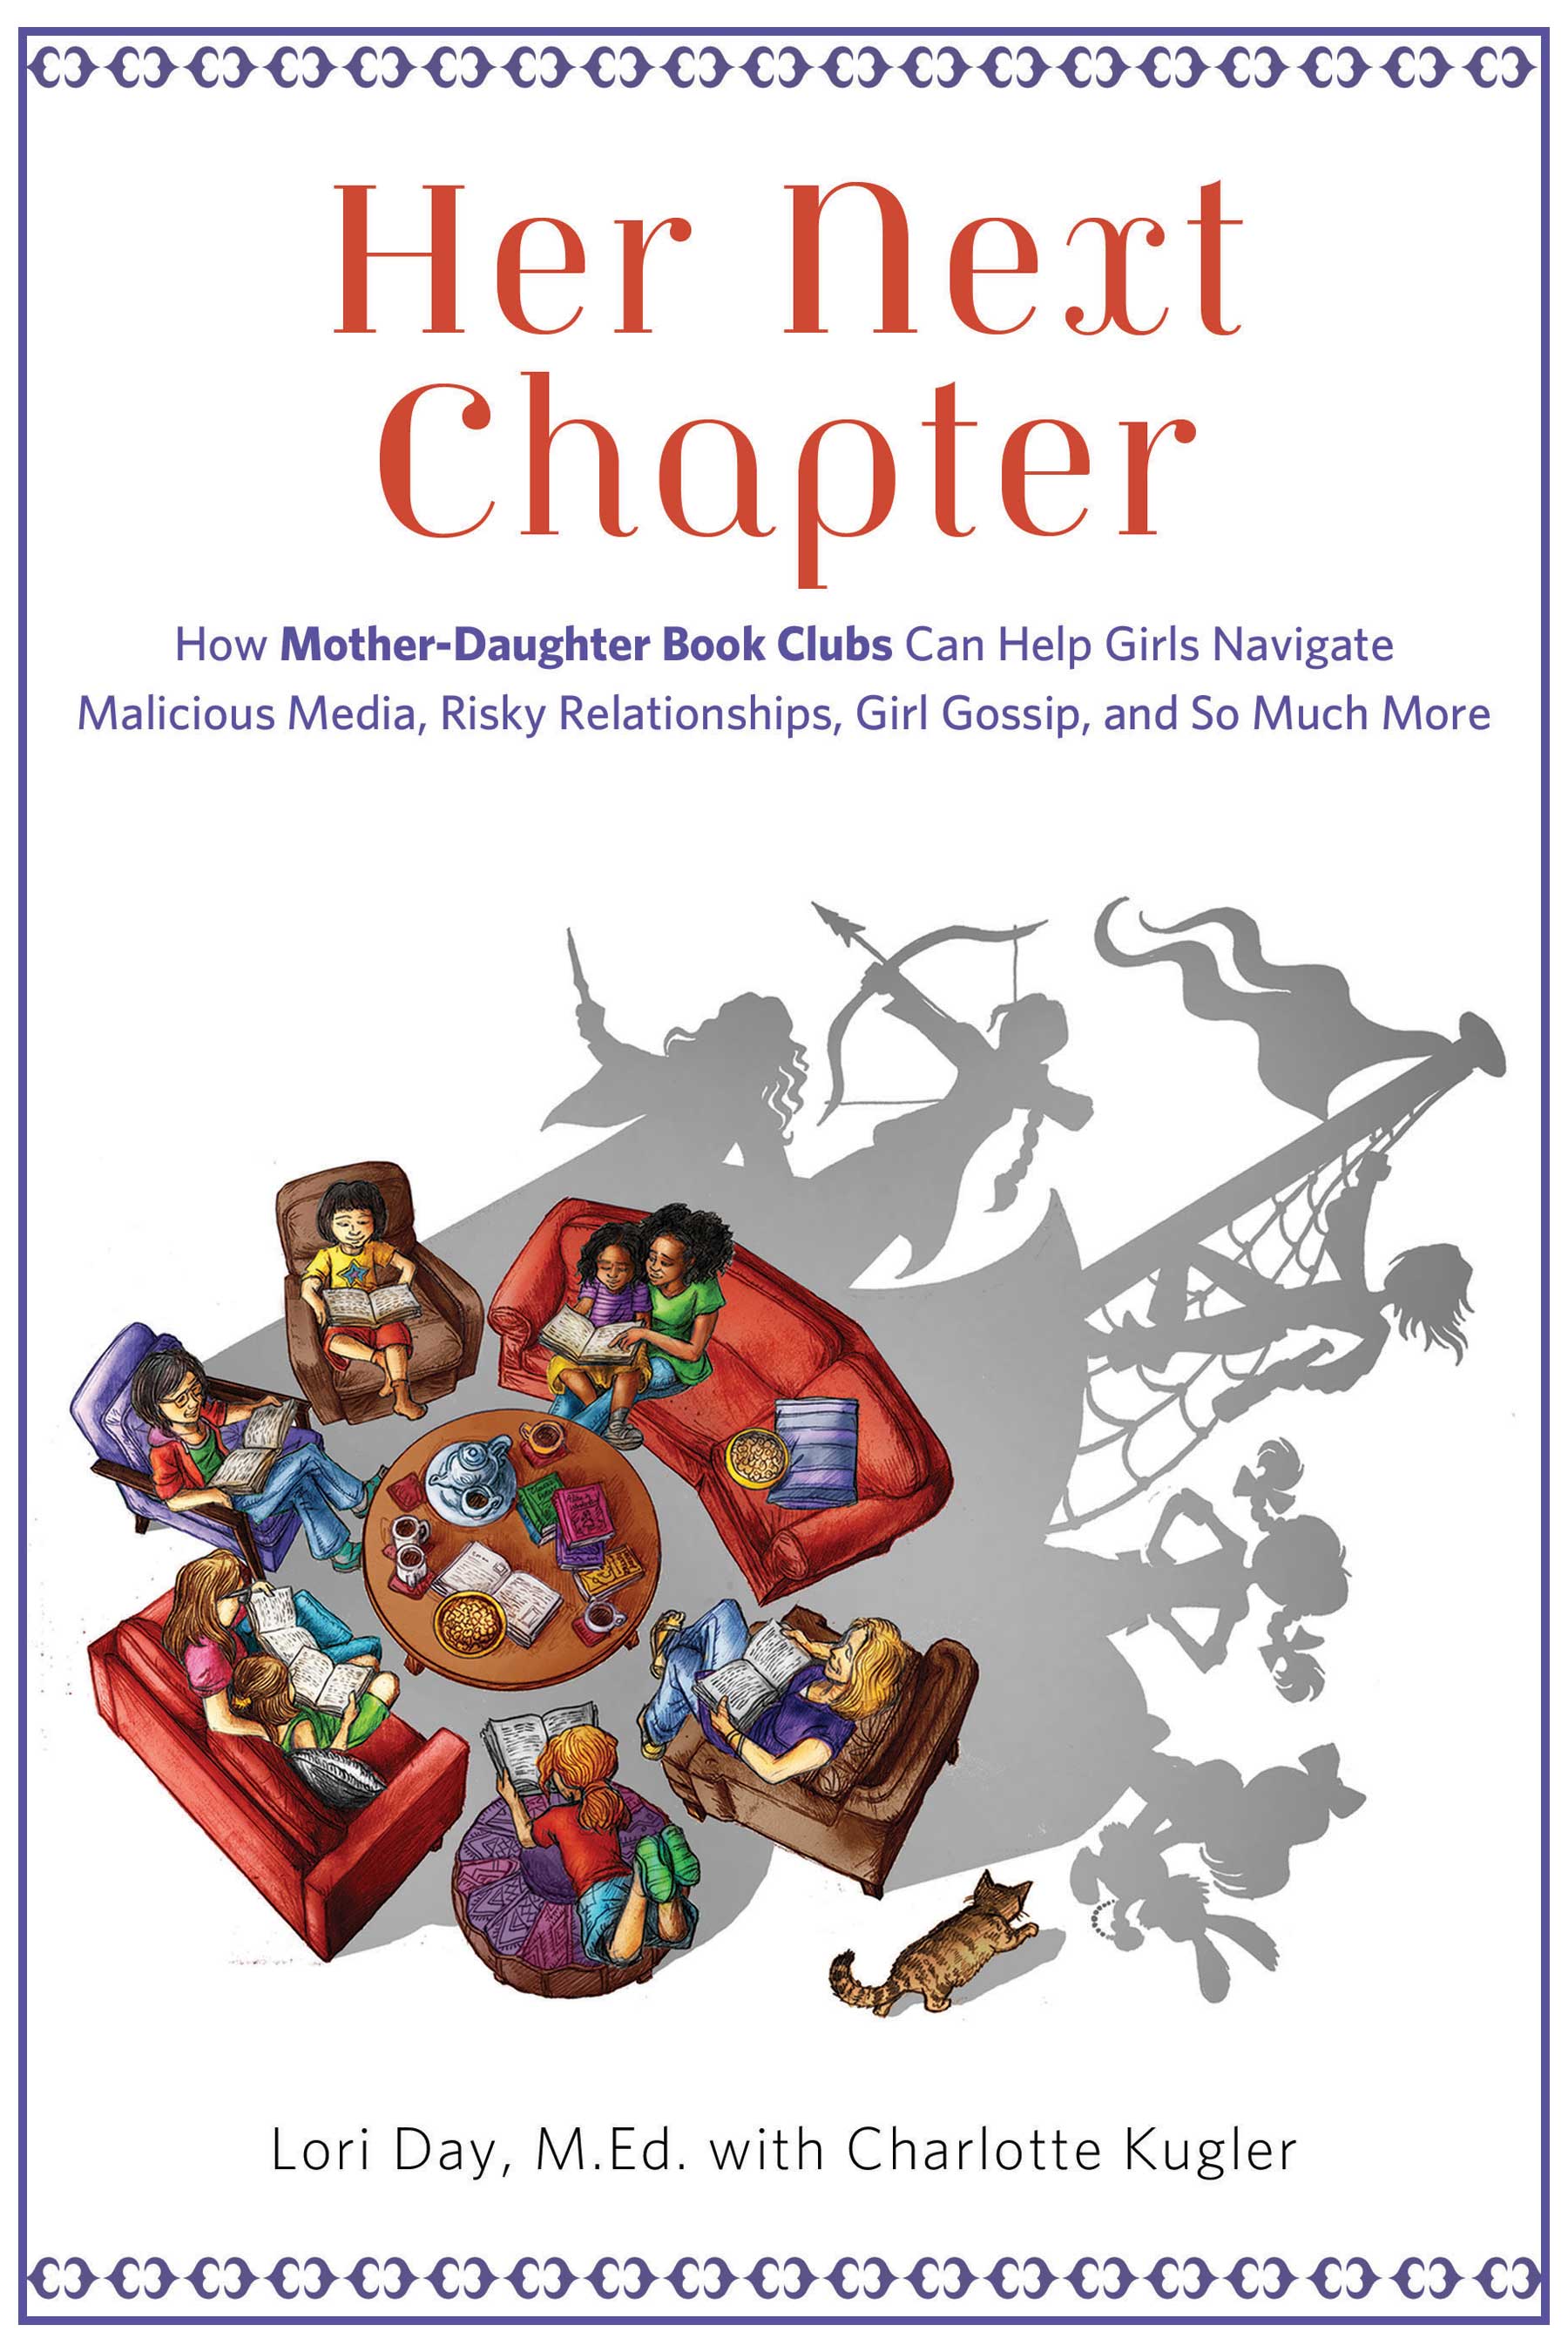 Her Next Chapter by Lori Day and Charlotte Kugler